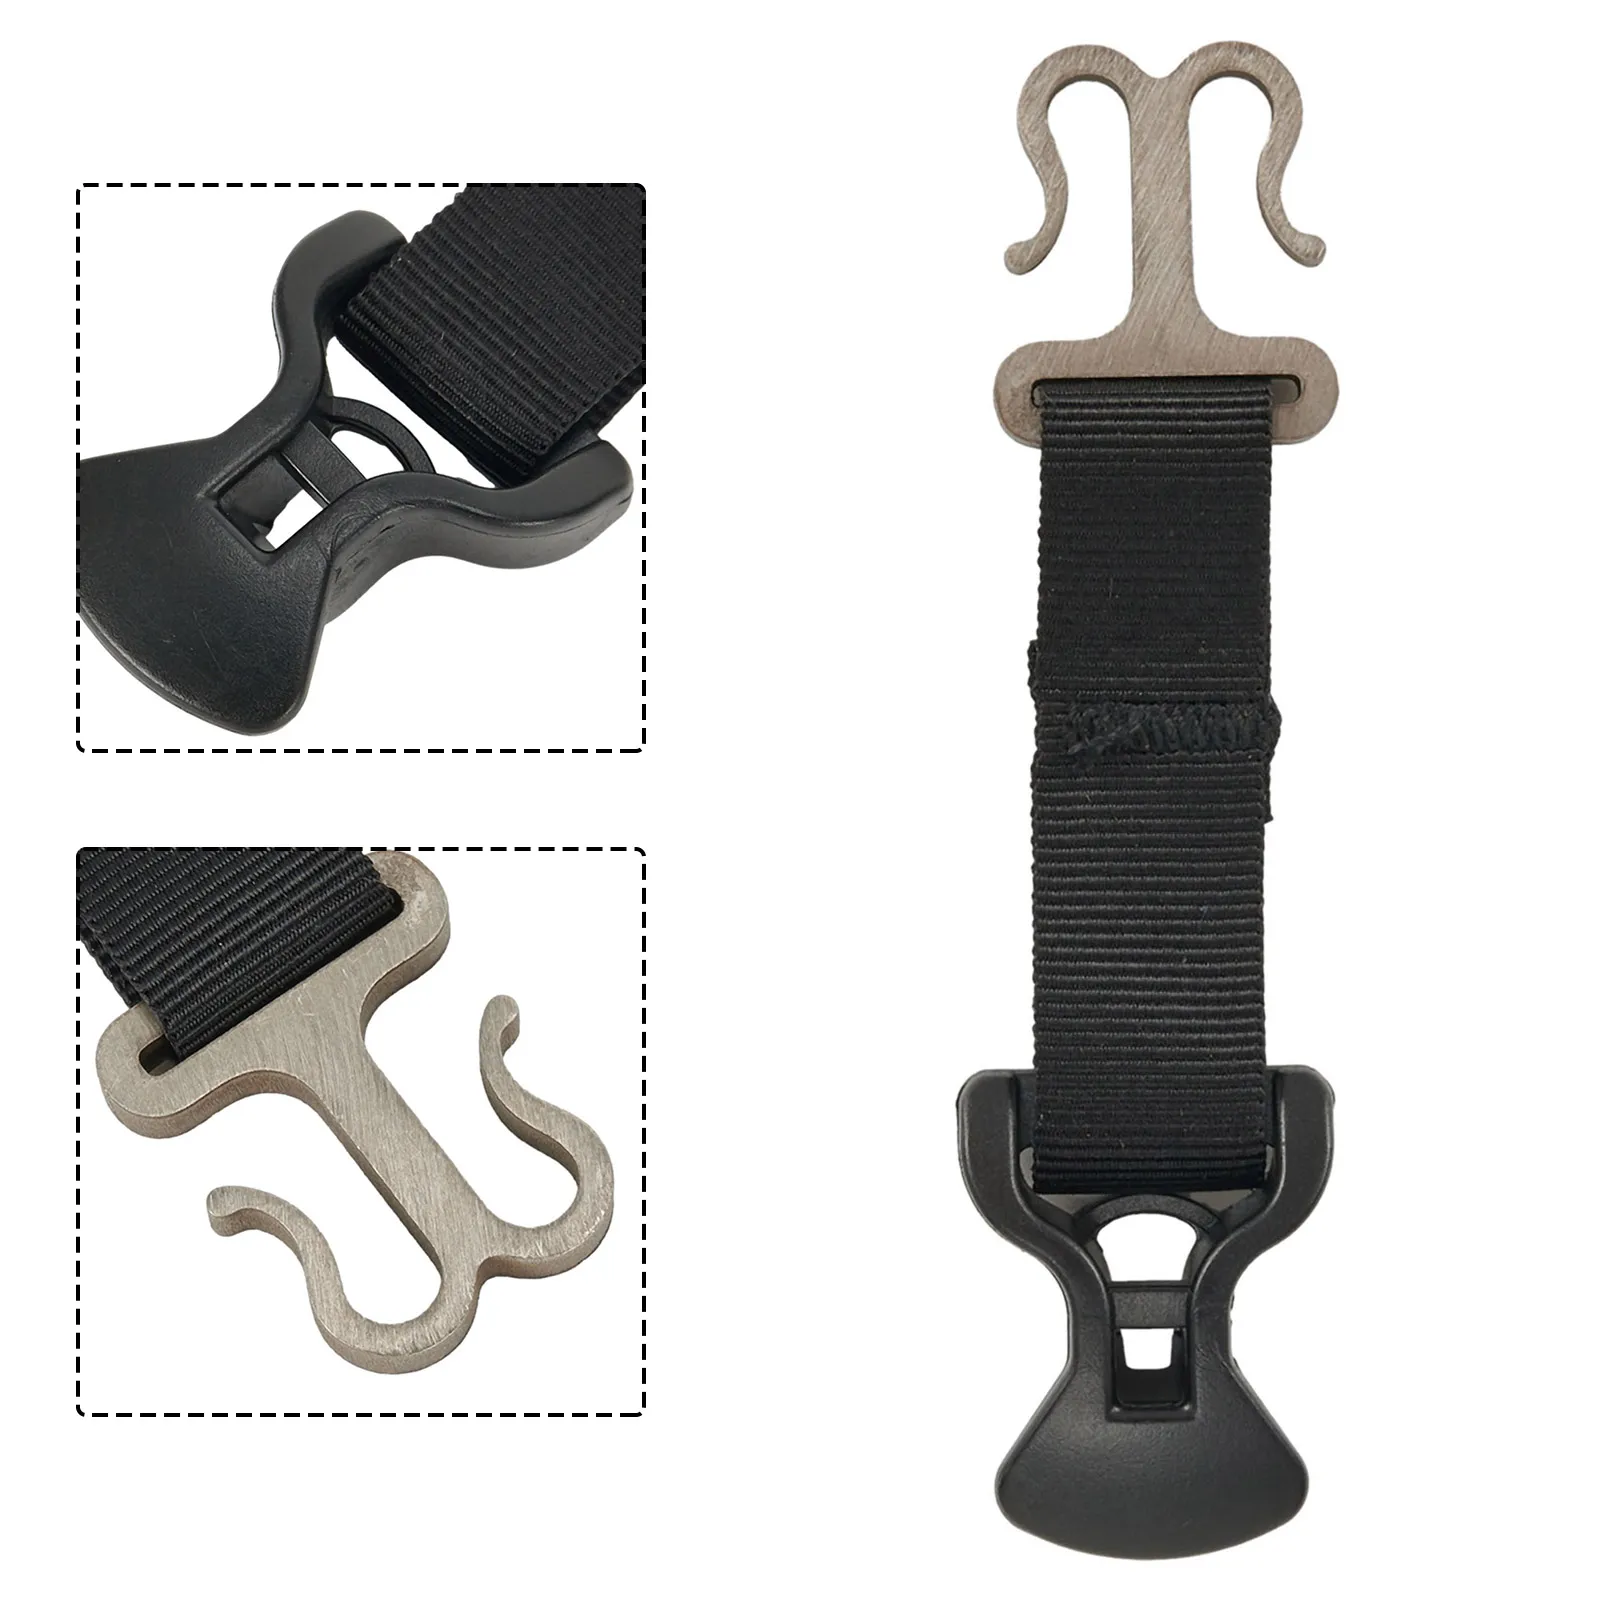 

Brand New Rope Holder Buckle Tent Set Up About 85x20mm Black Connection Durable Fixation Nylon+Stainless Steel+ABS